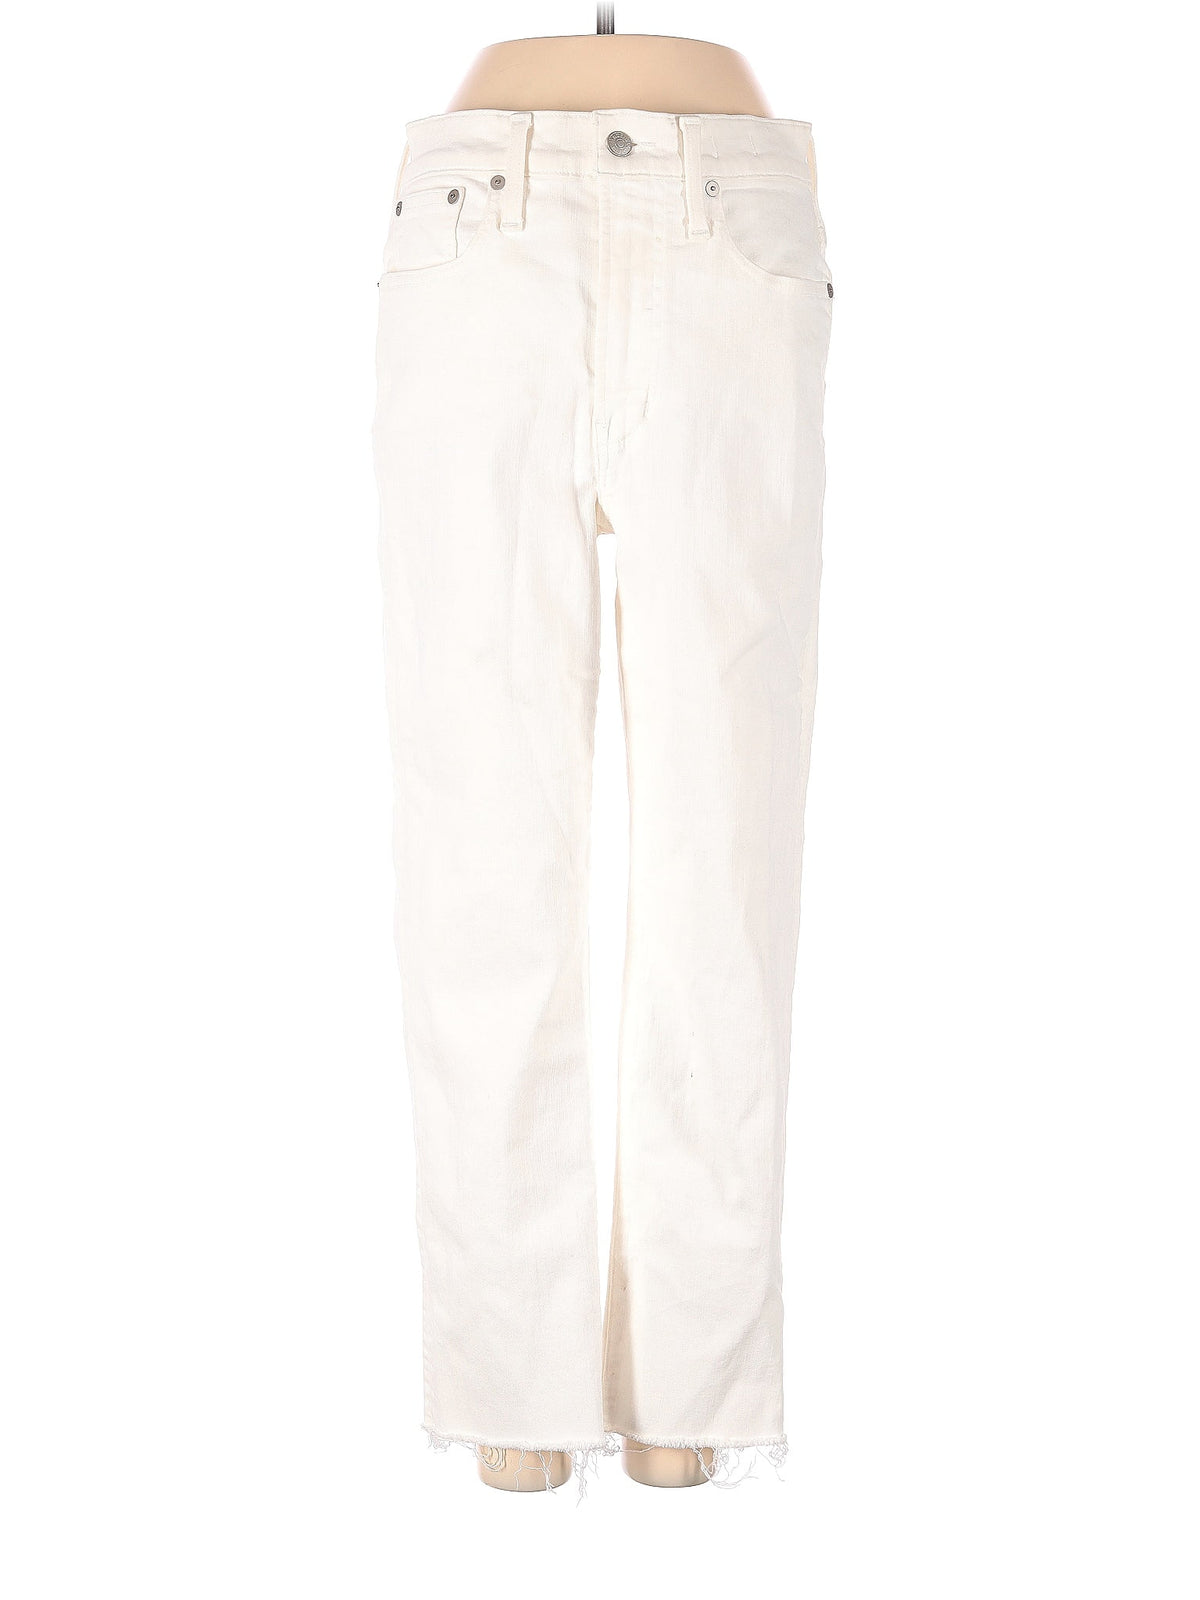 High-Rise Straight-leg Jeans in Light Wash waist size - 26 P